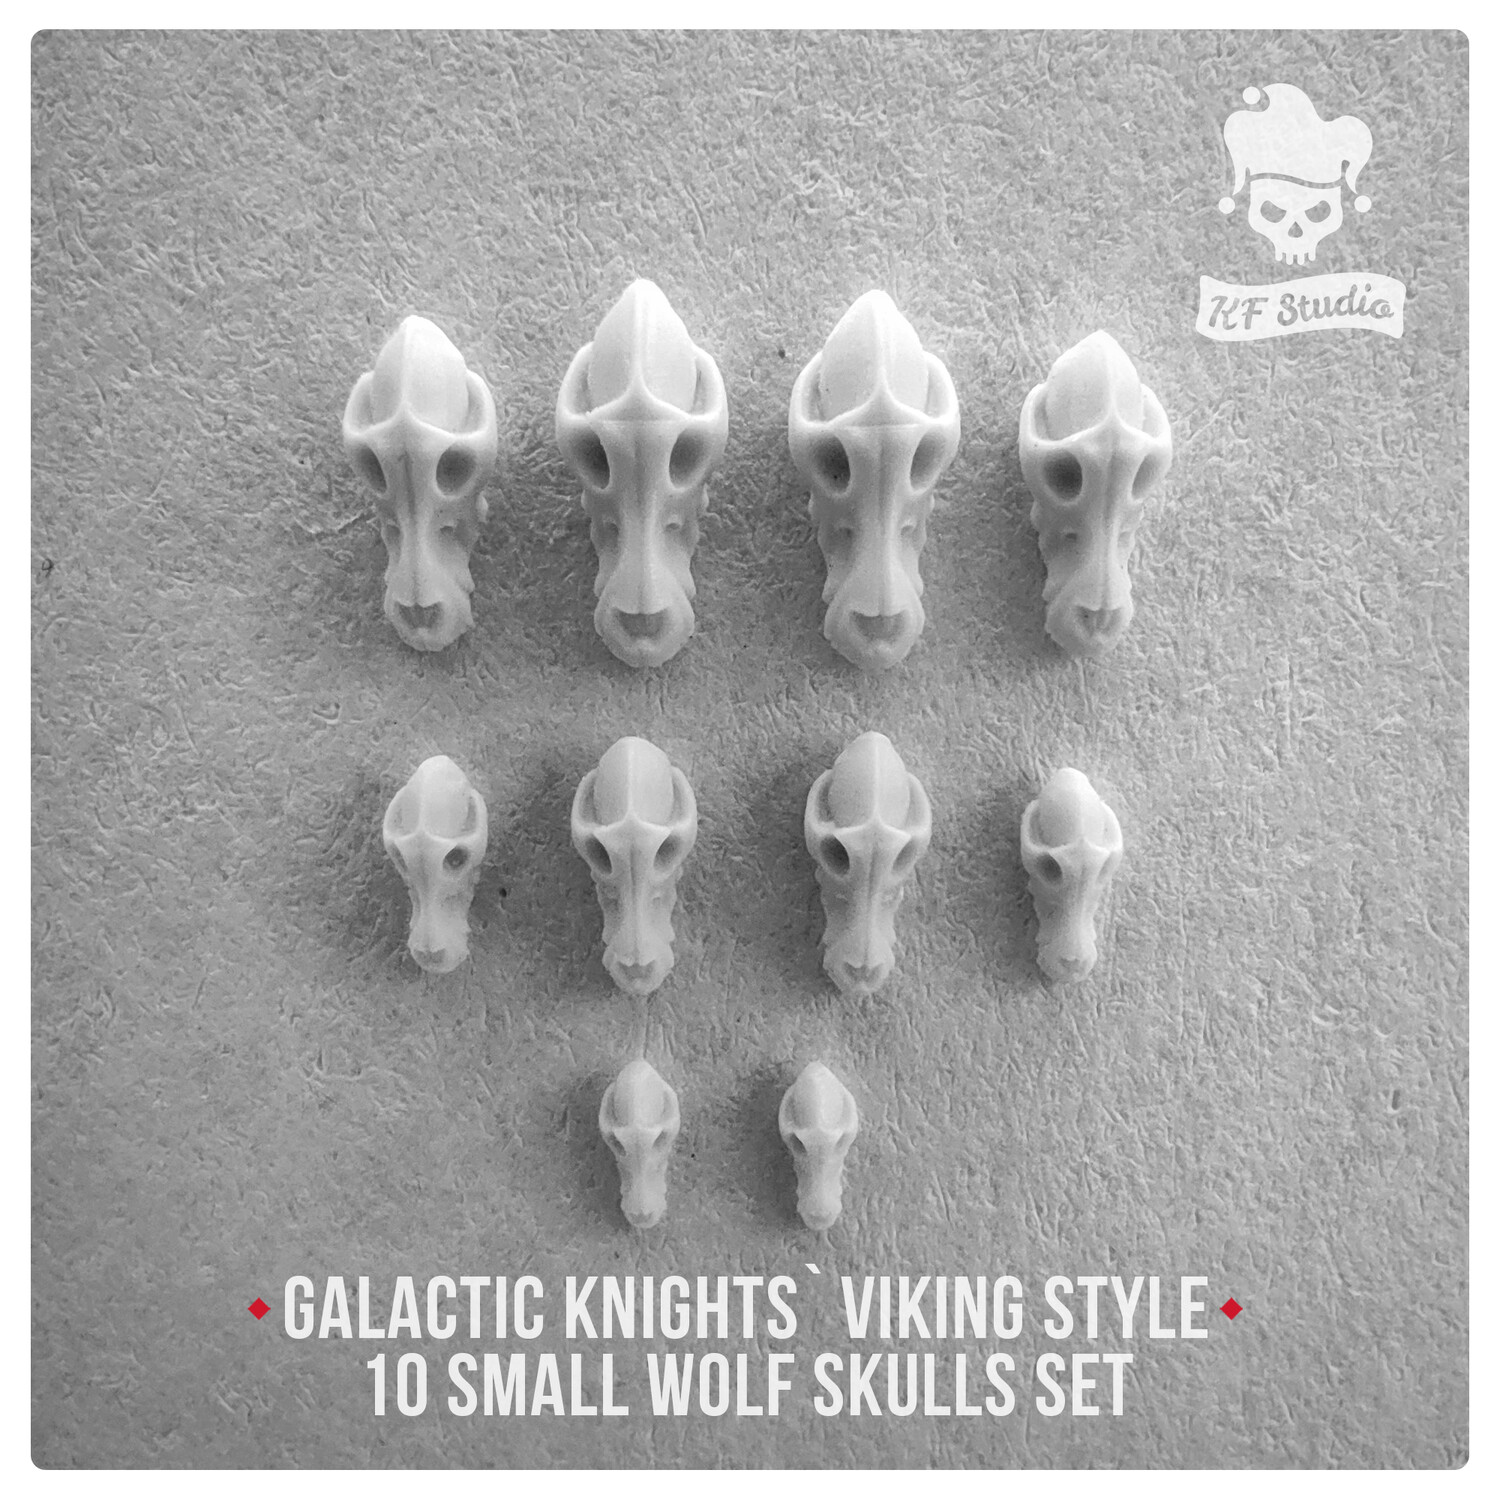 Galactic Knights Viking Style small wolf skulls by KFStudio